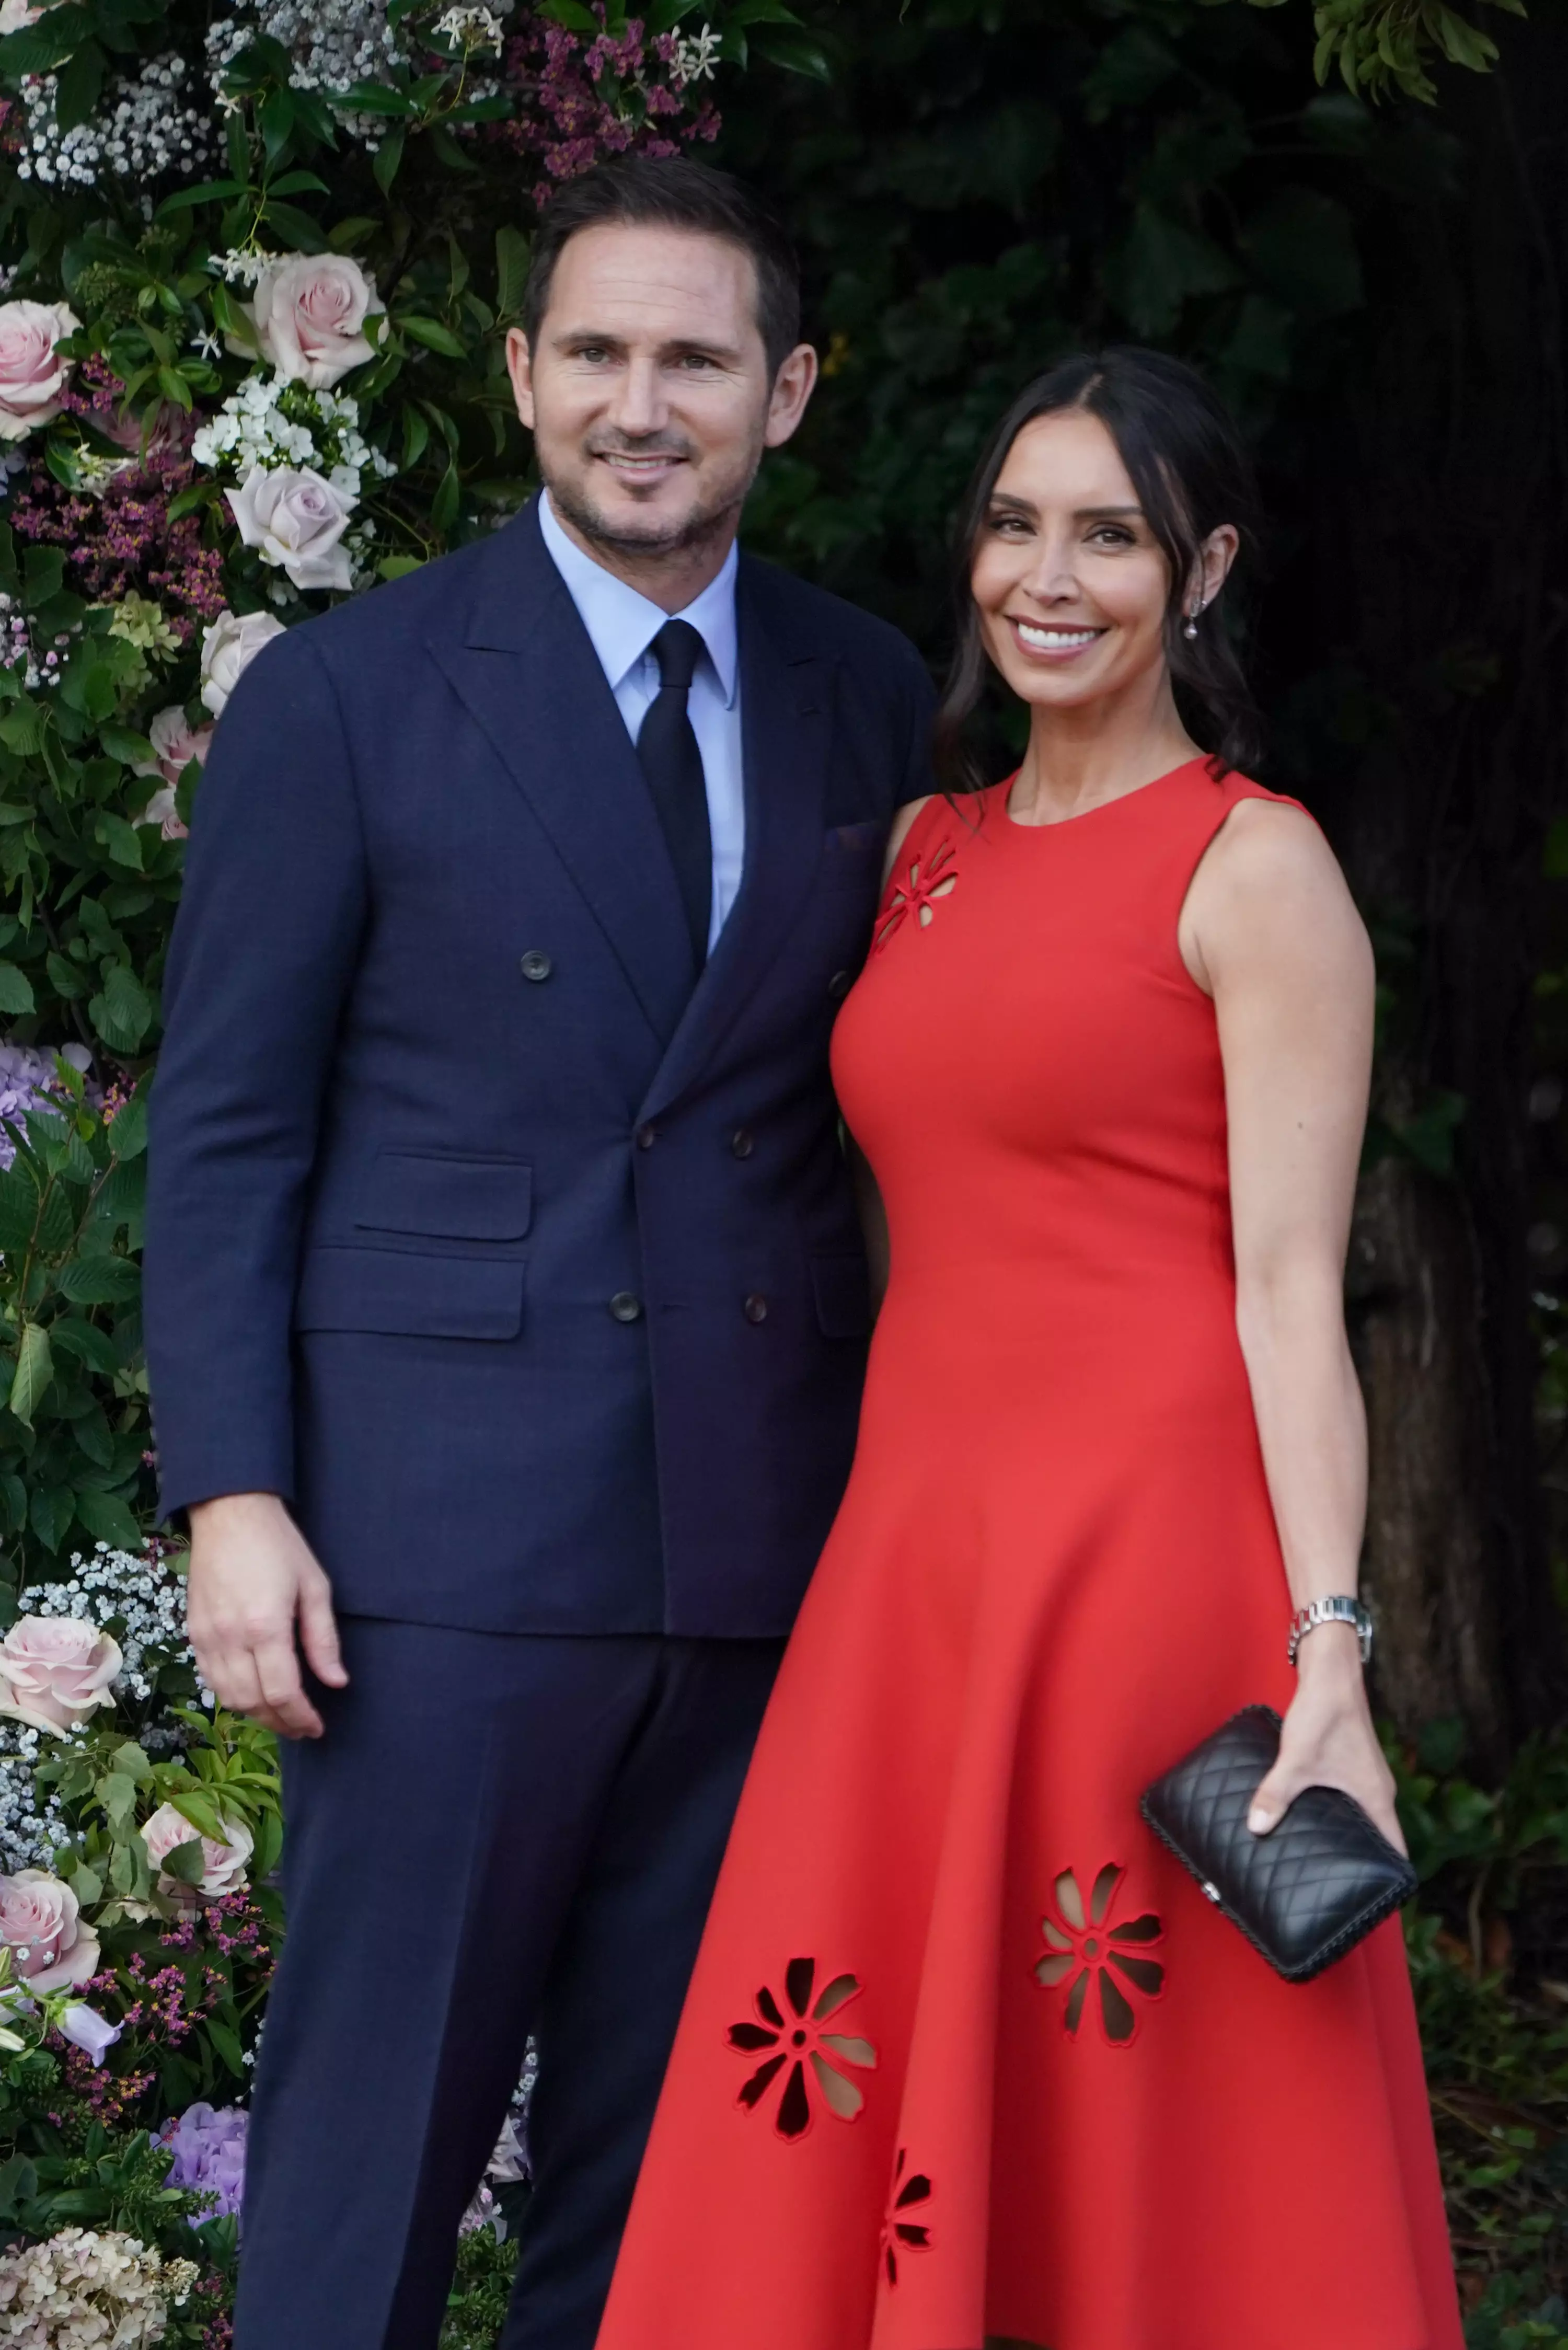 Frank and Christine Lampard.